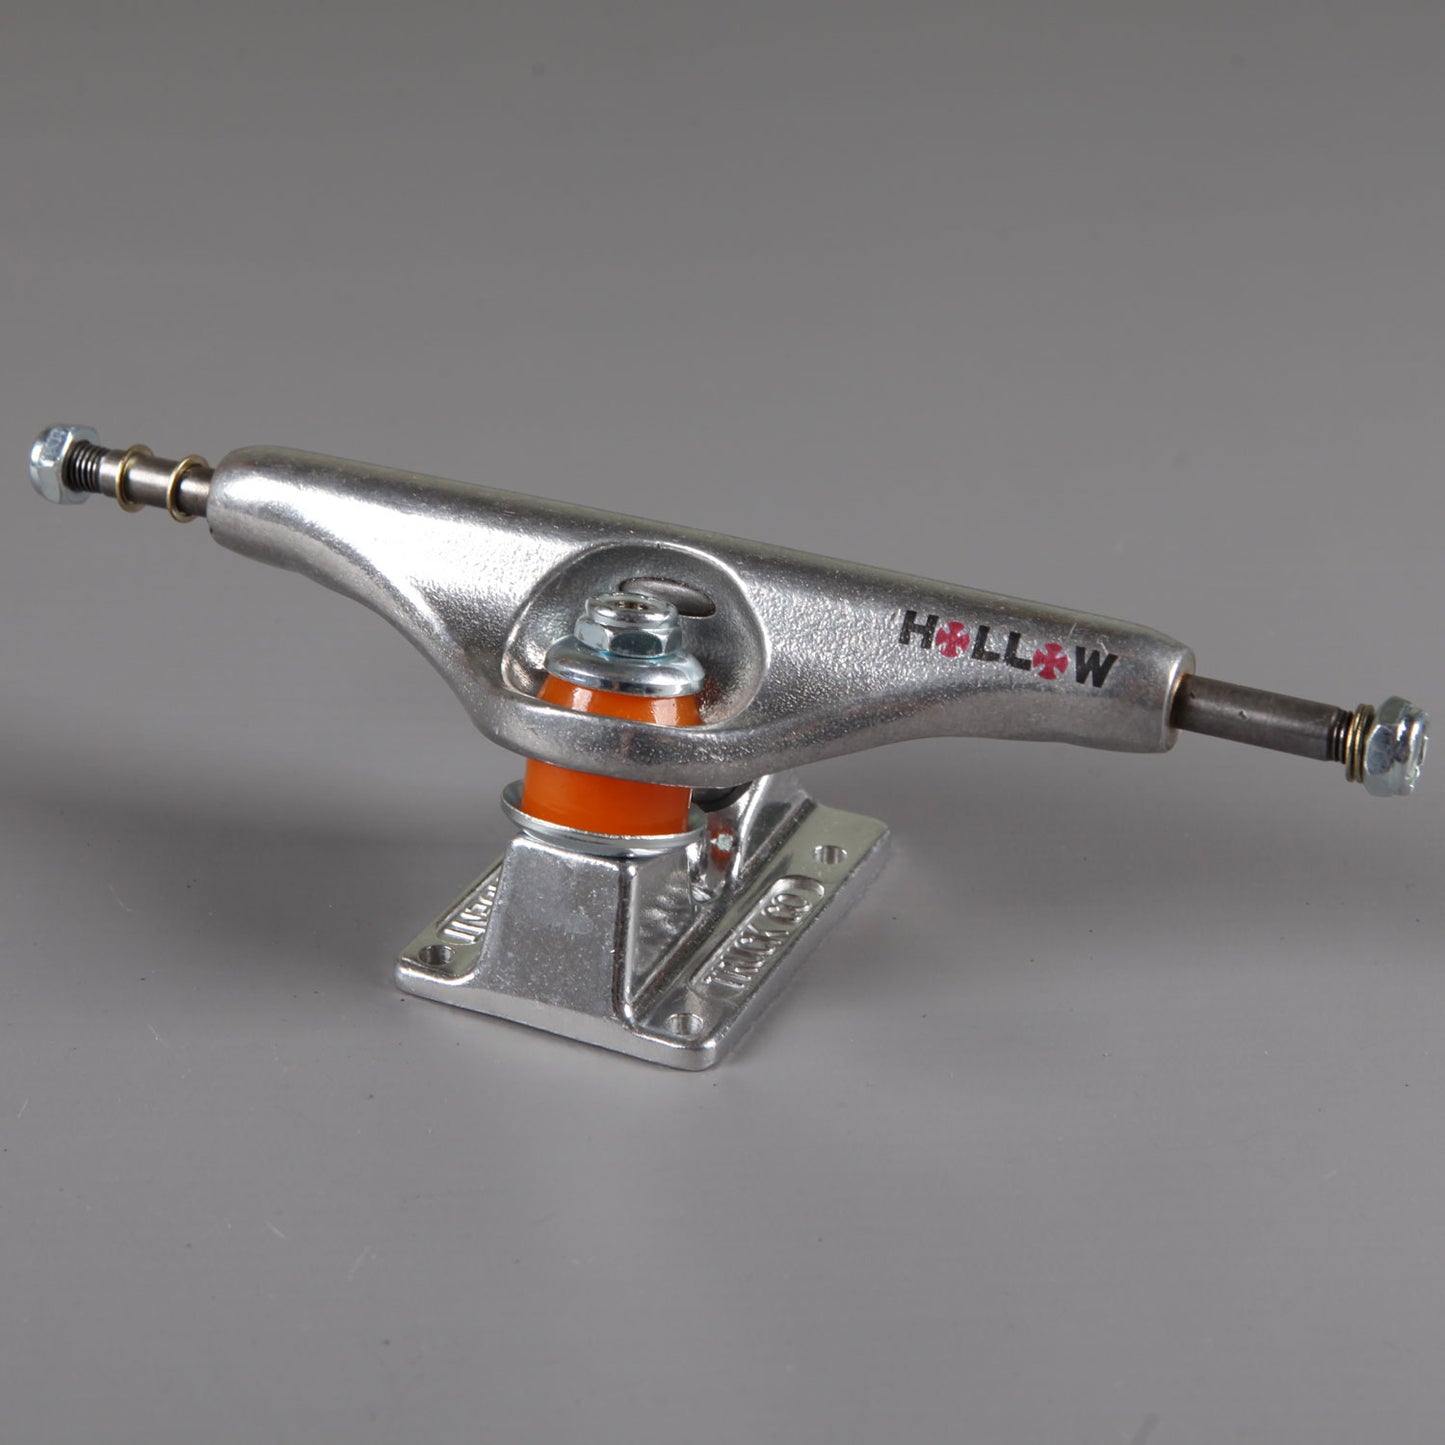 Independent 'Forged Hollow' Stage 11 159 Trucks (Silver) - CSC Skate Shop UK